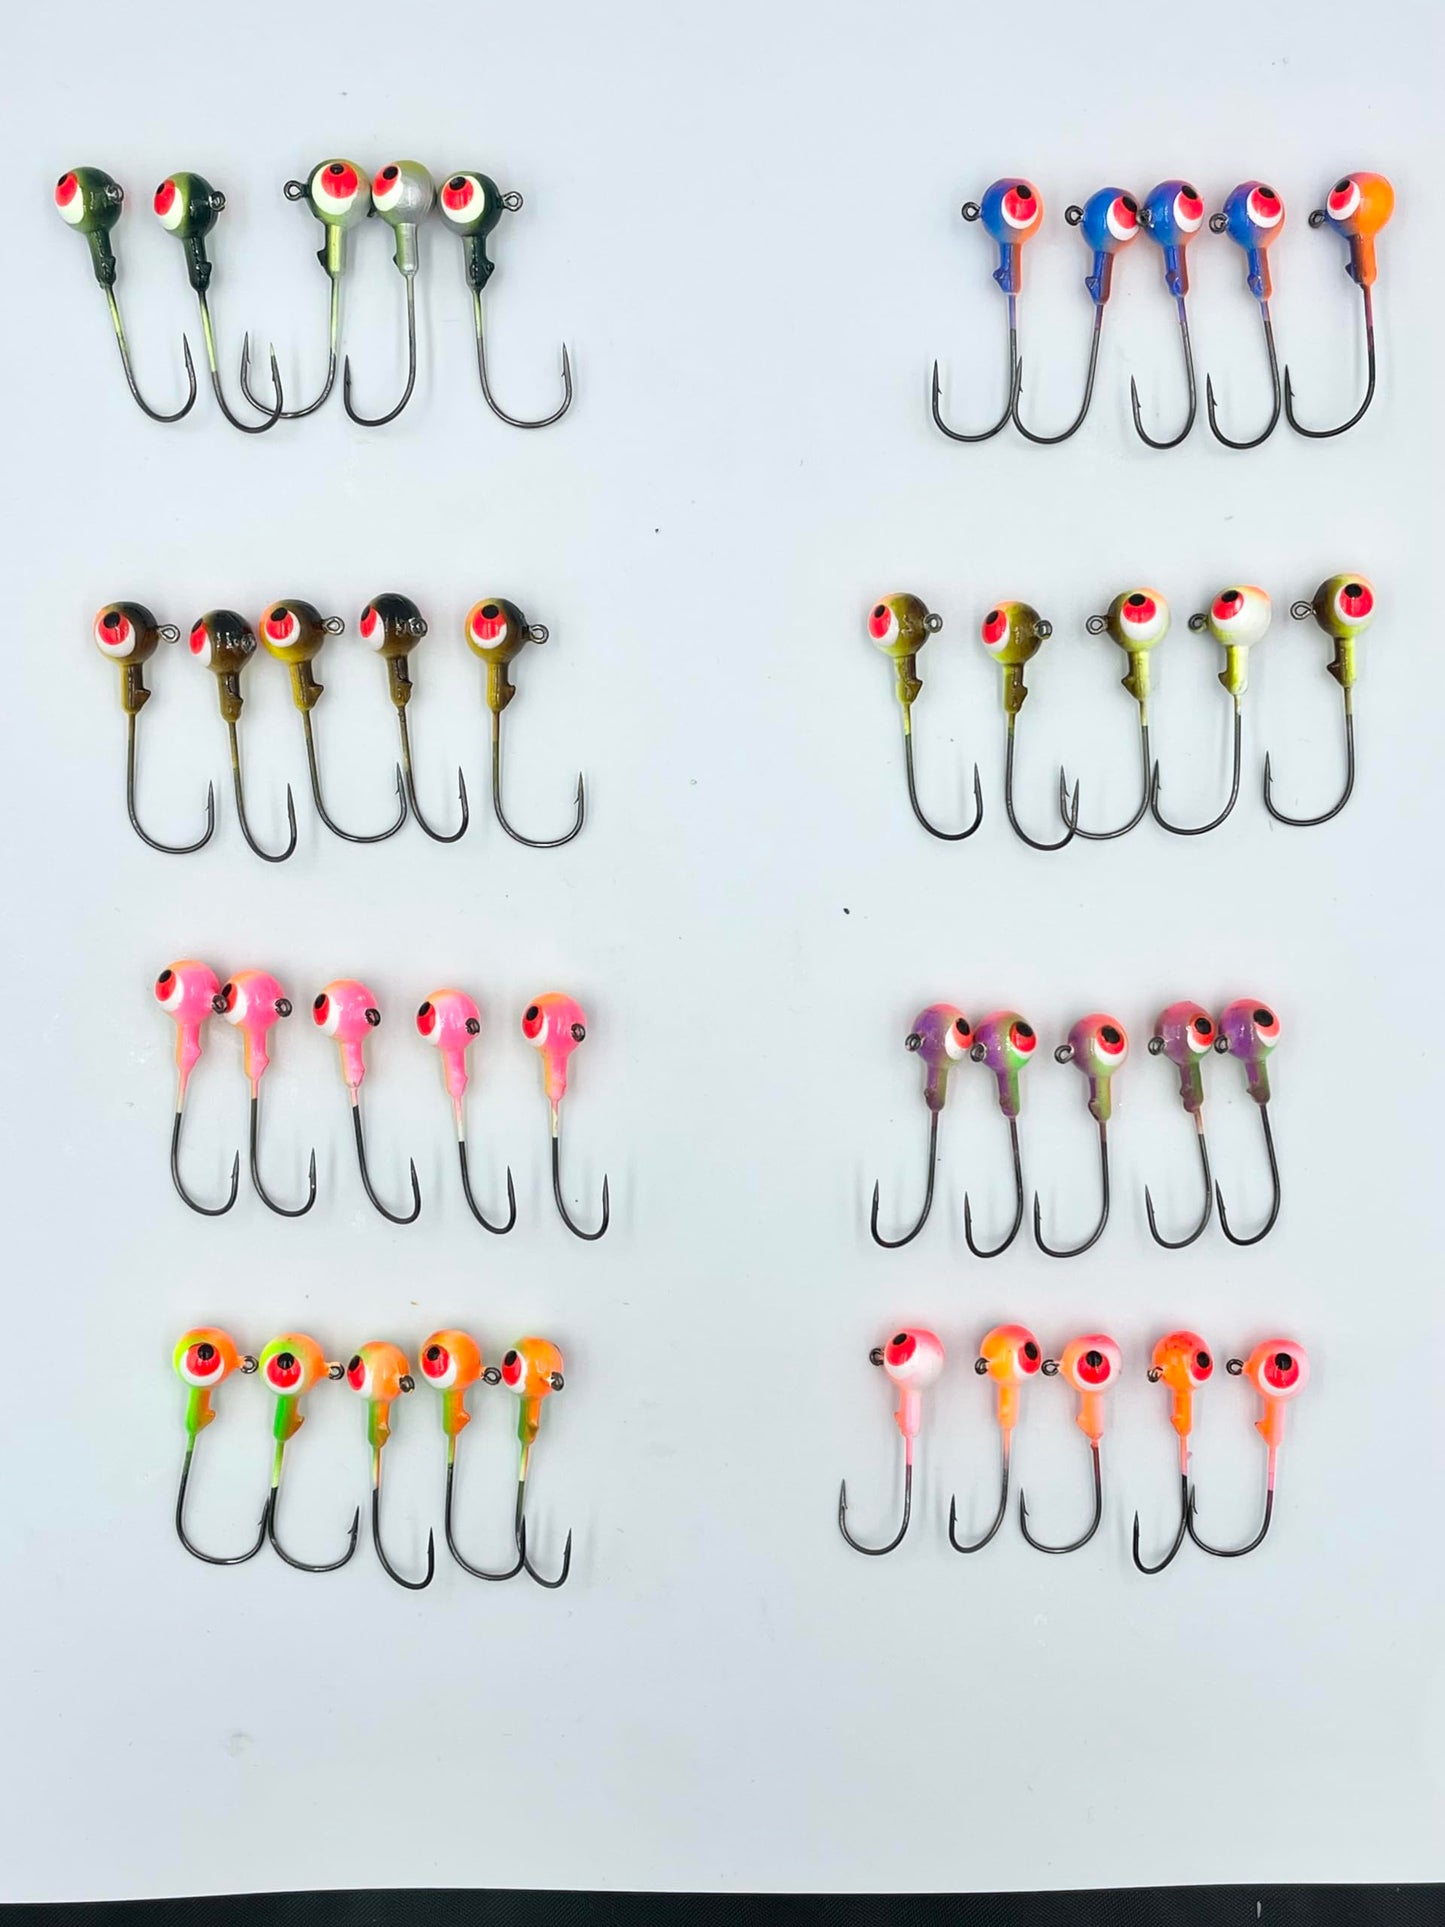 100pc Pro Guides Series Jig Heads/Tails Fishing Kit, 1/4oz